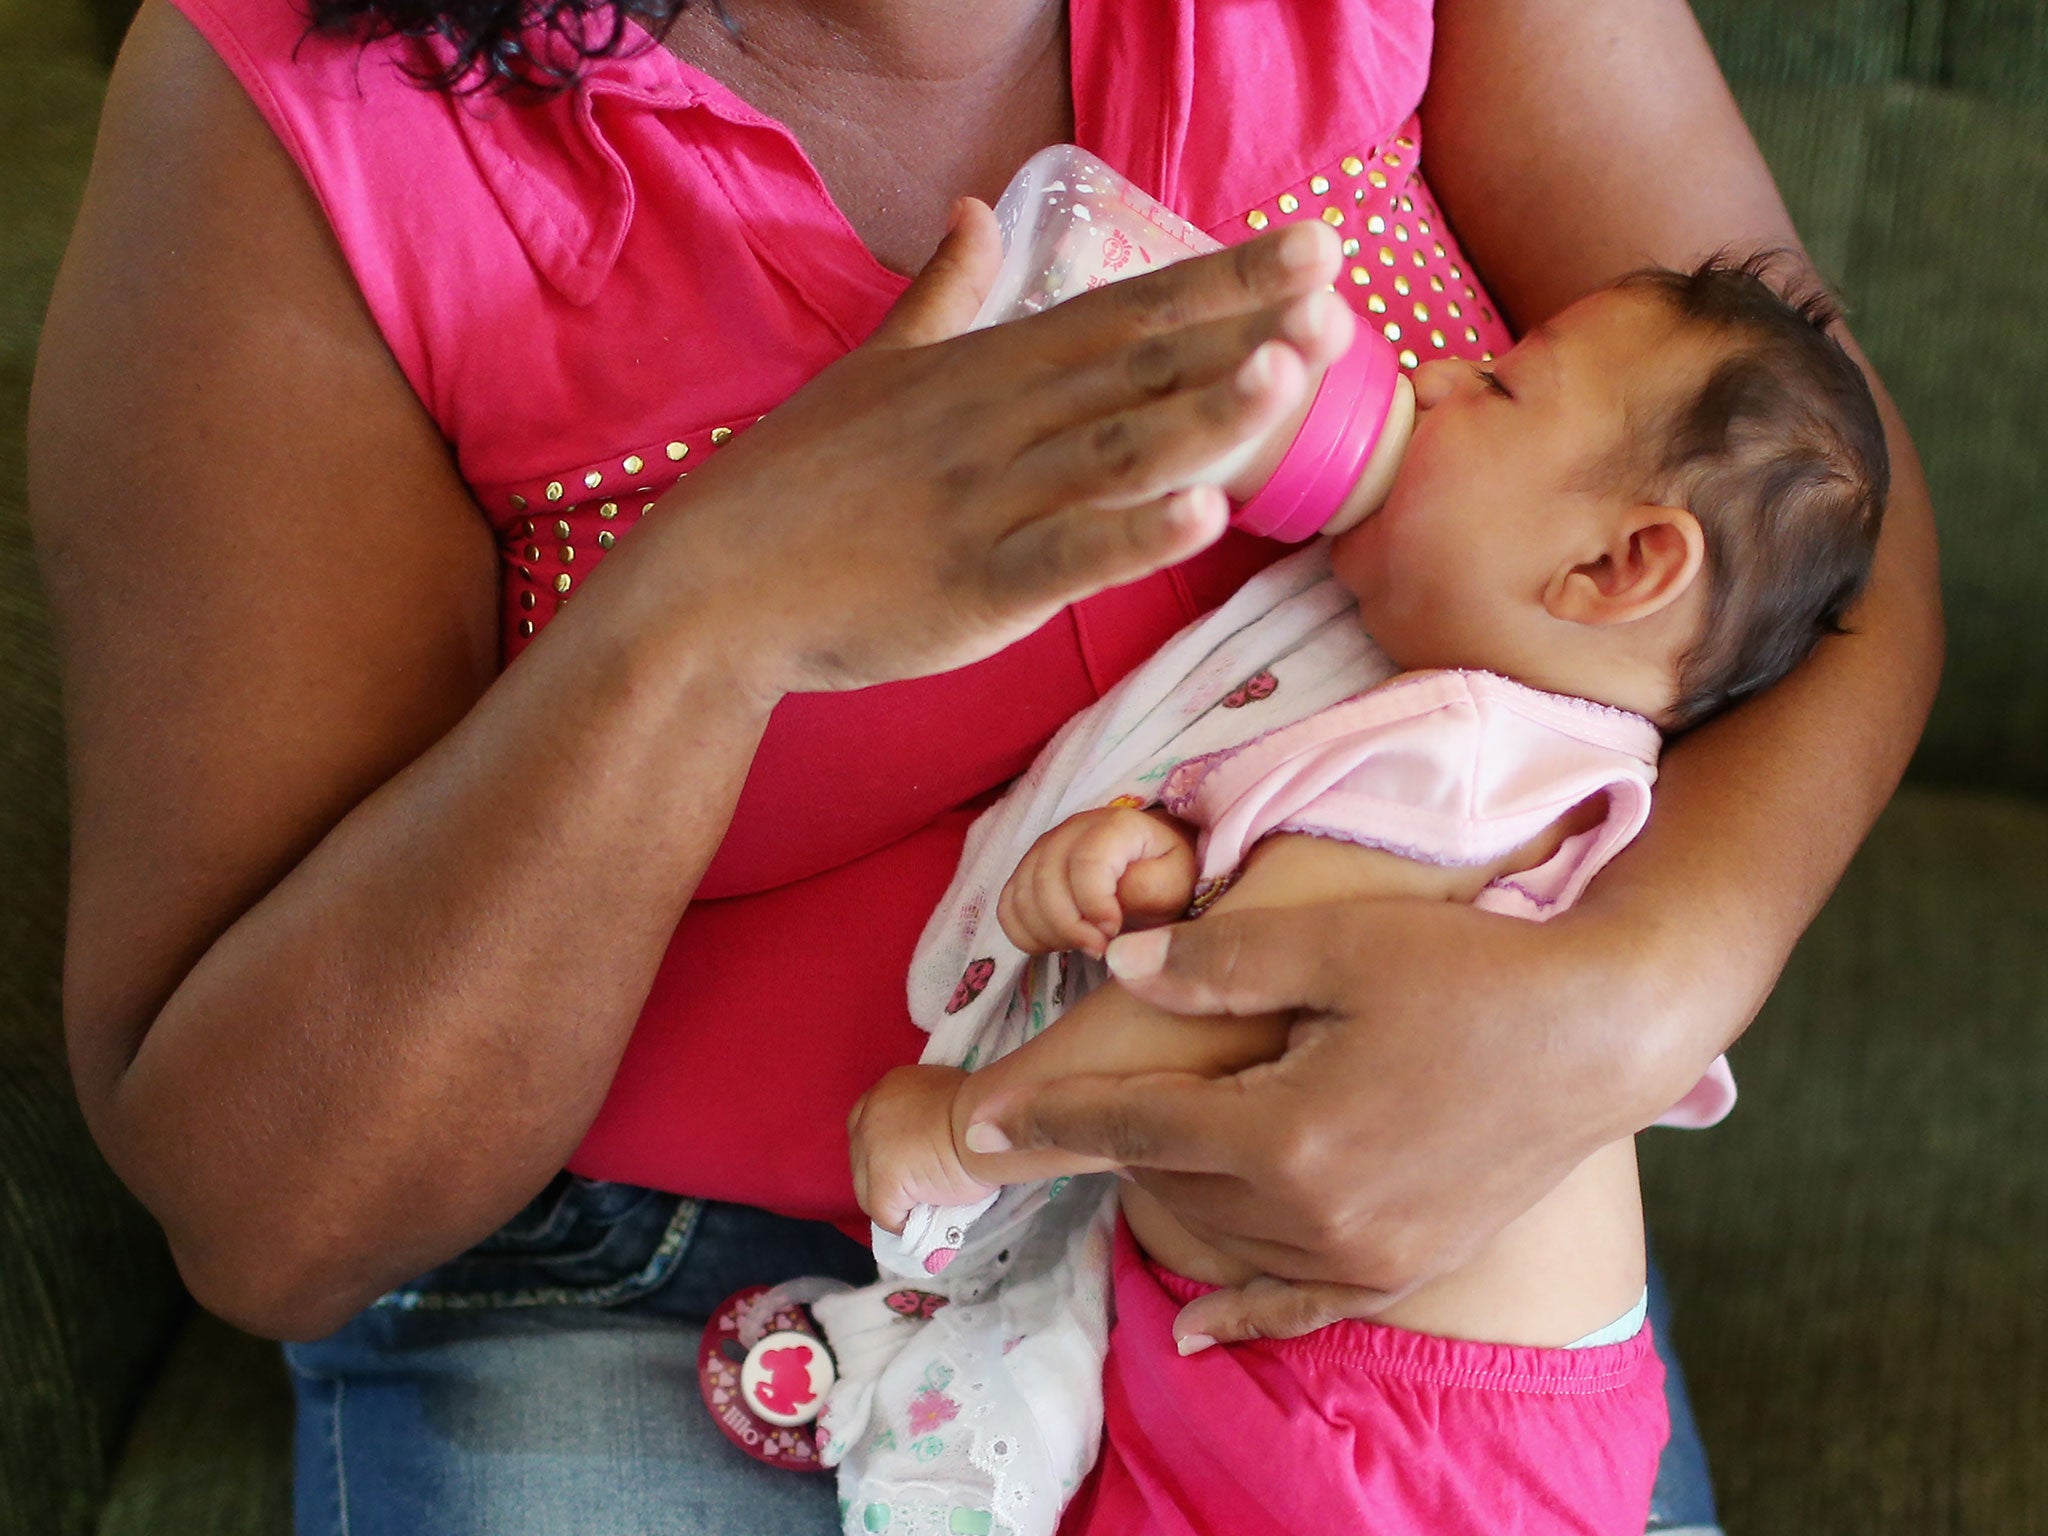 &#13;
A three-months-old, who has microcephaly, in Recife, Brazil.&#13;